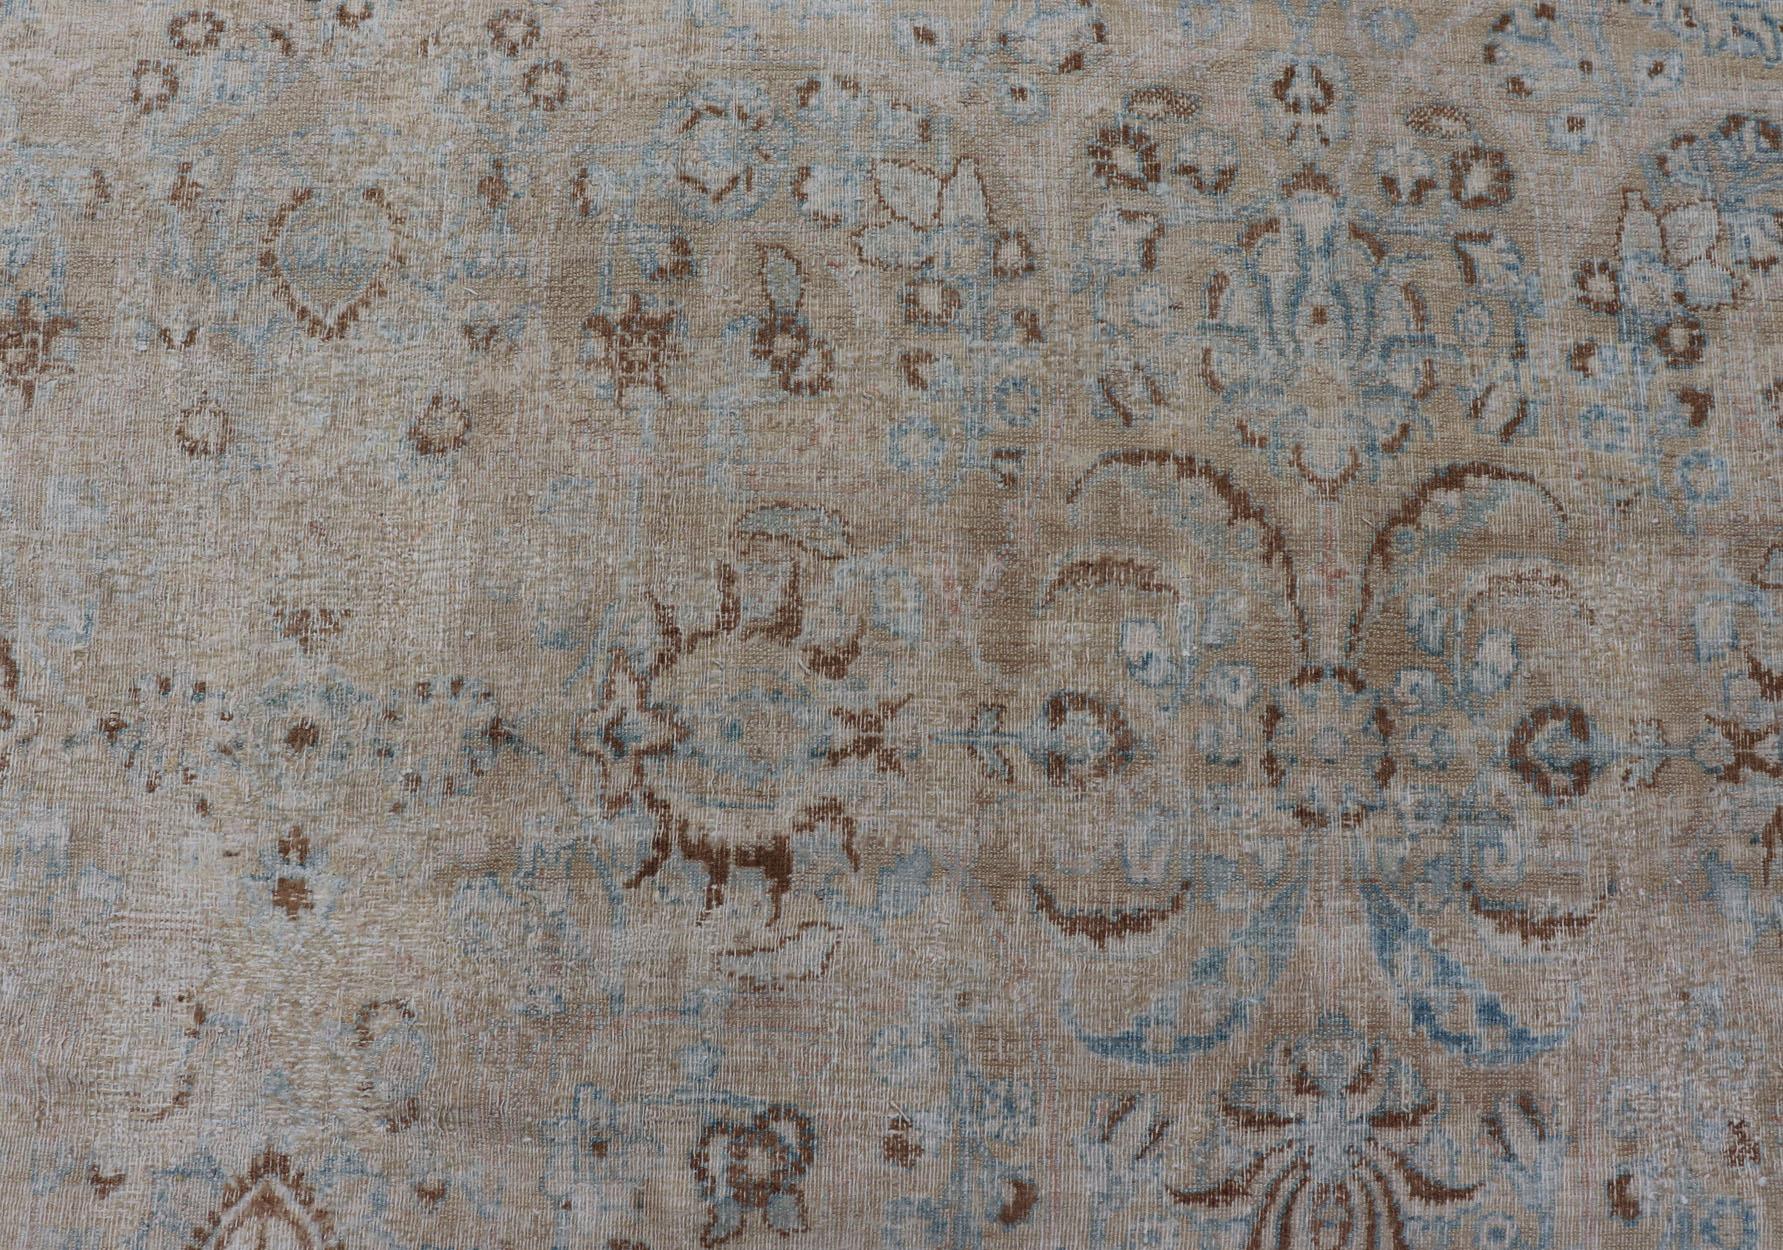 Antique Persian Mashhad distressed carpet with tan and blue floral and medallion design, / ZIR-51-KV-10. Persian Mashhad floral design. 

Measures:10'2 x 12'9 

This muted antique distressed Persian Mashhad carpet is primarily characterized by